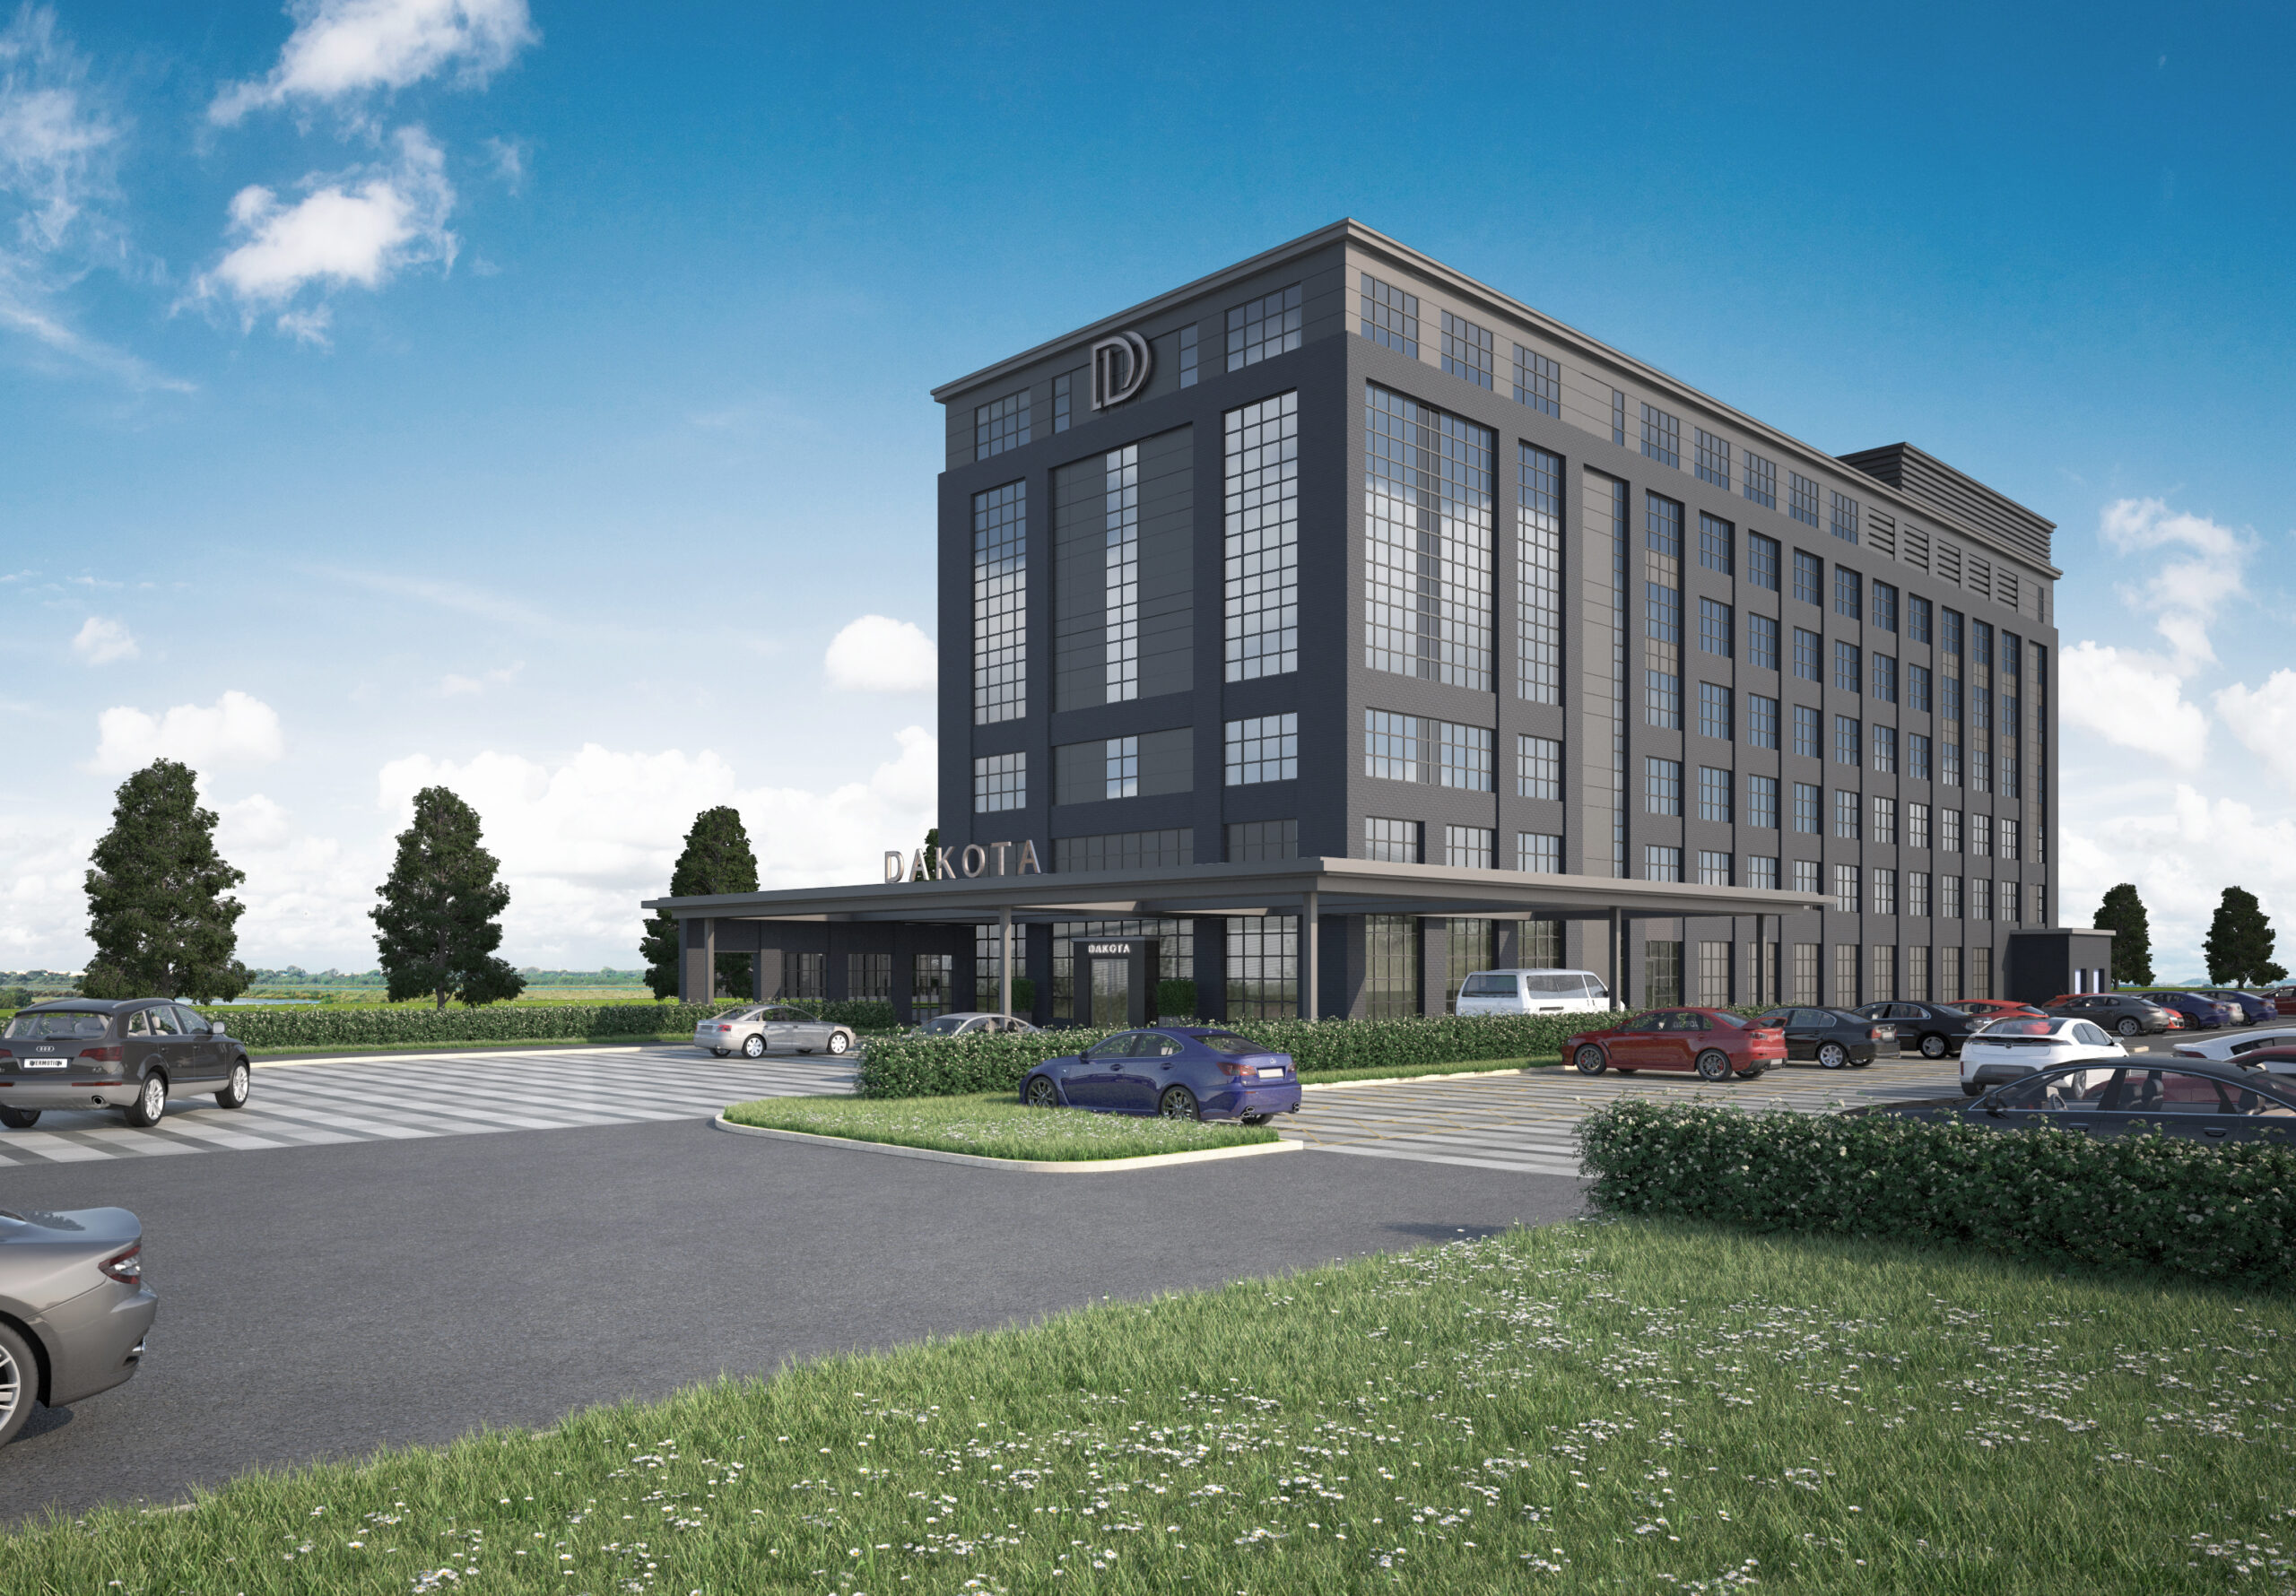 Dakota Hotels has submitted plans for a new location at Manchester Airport